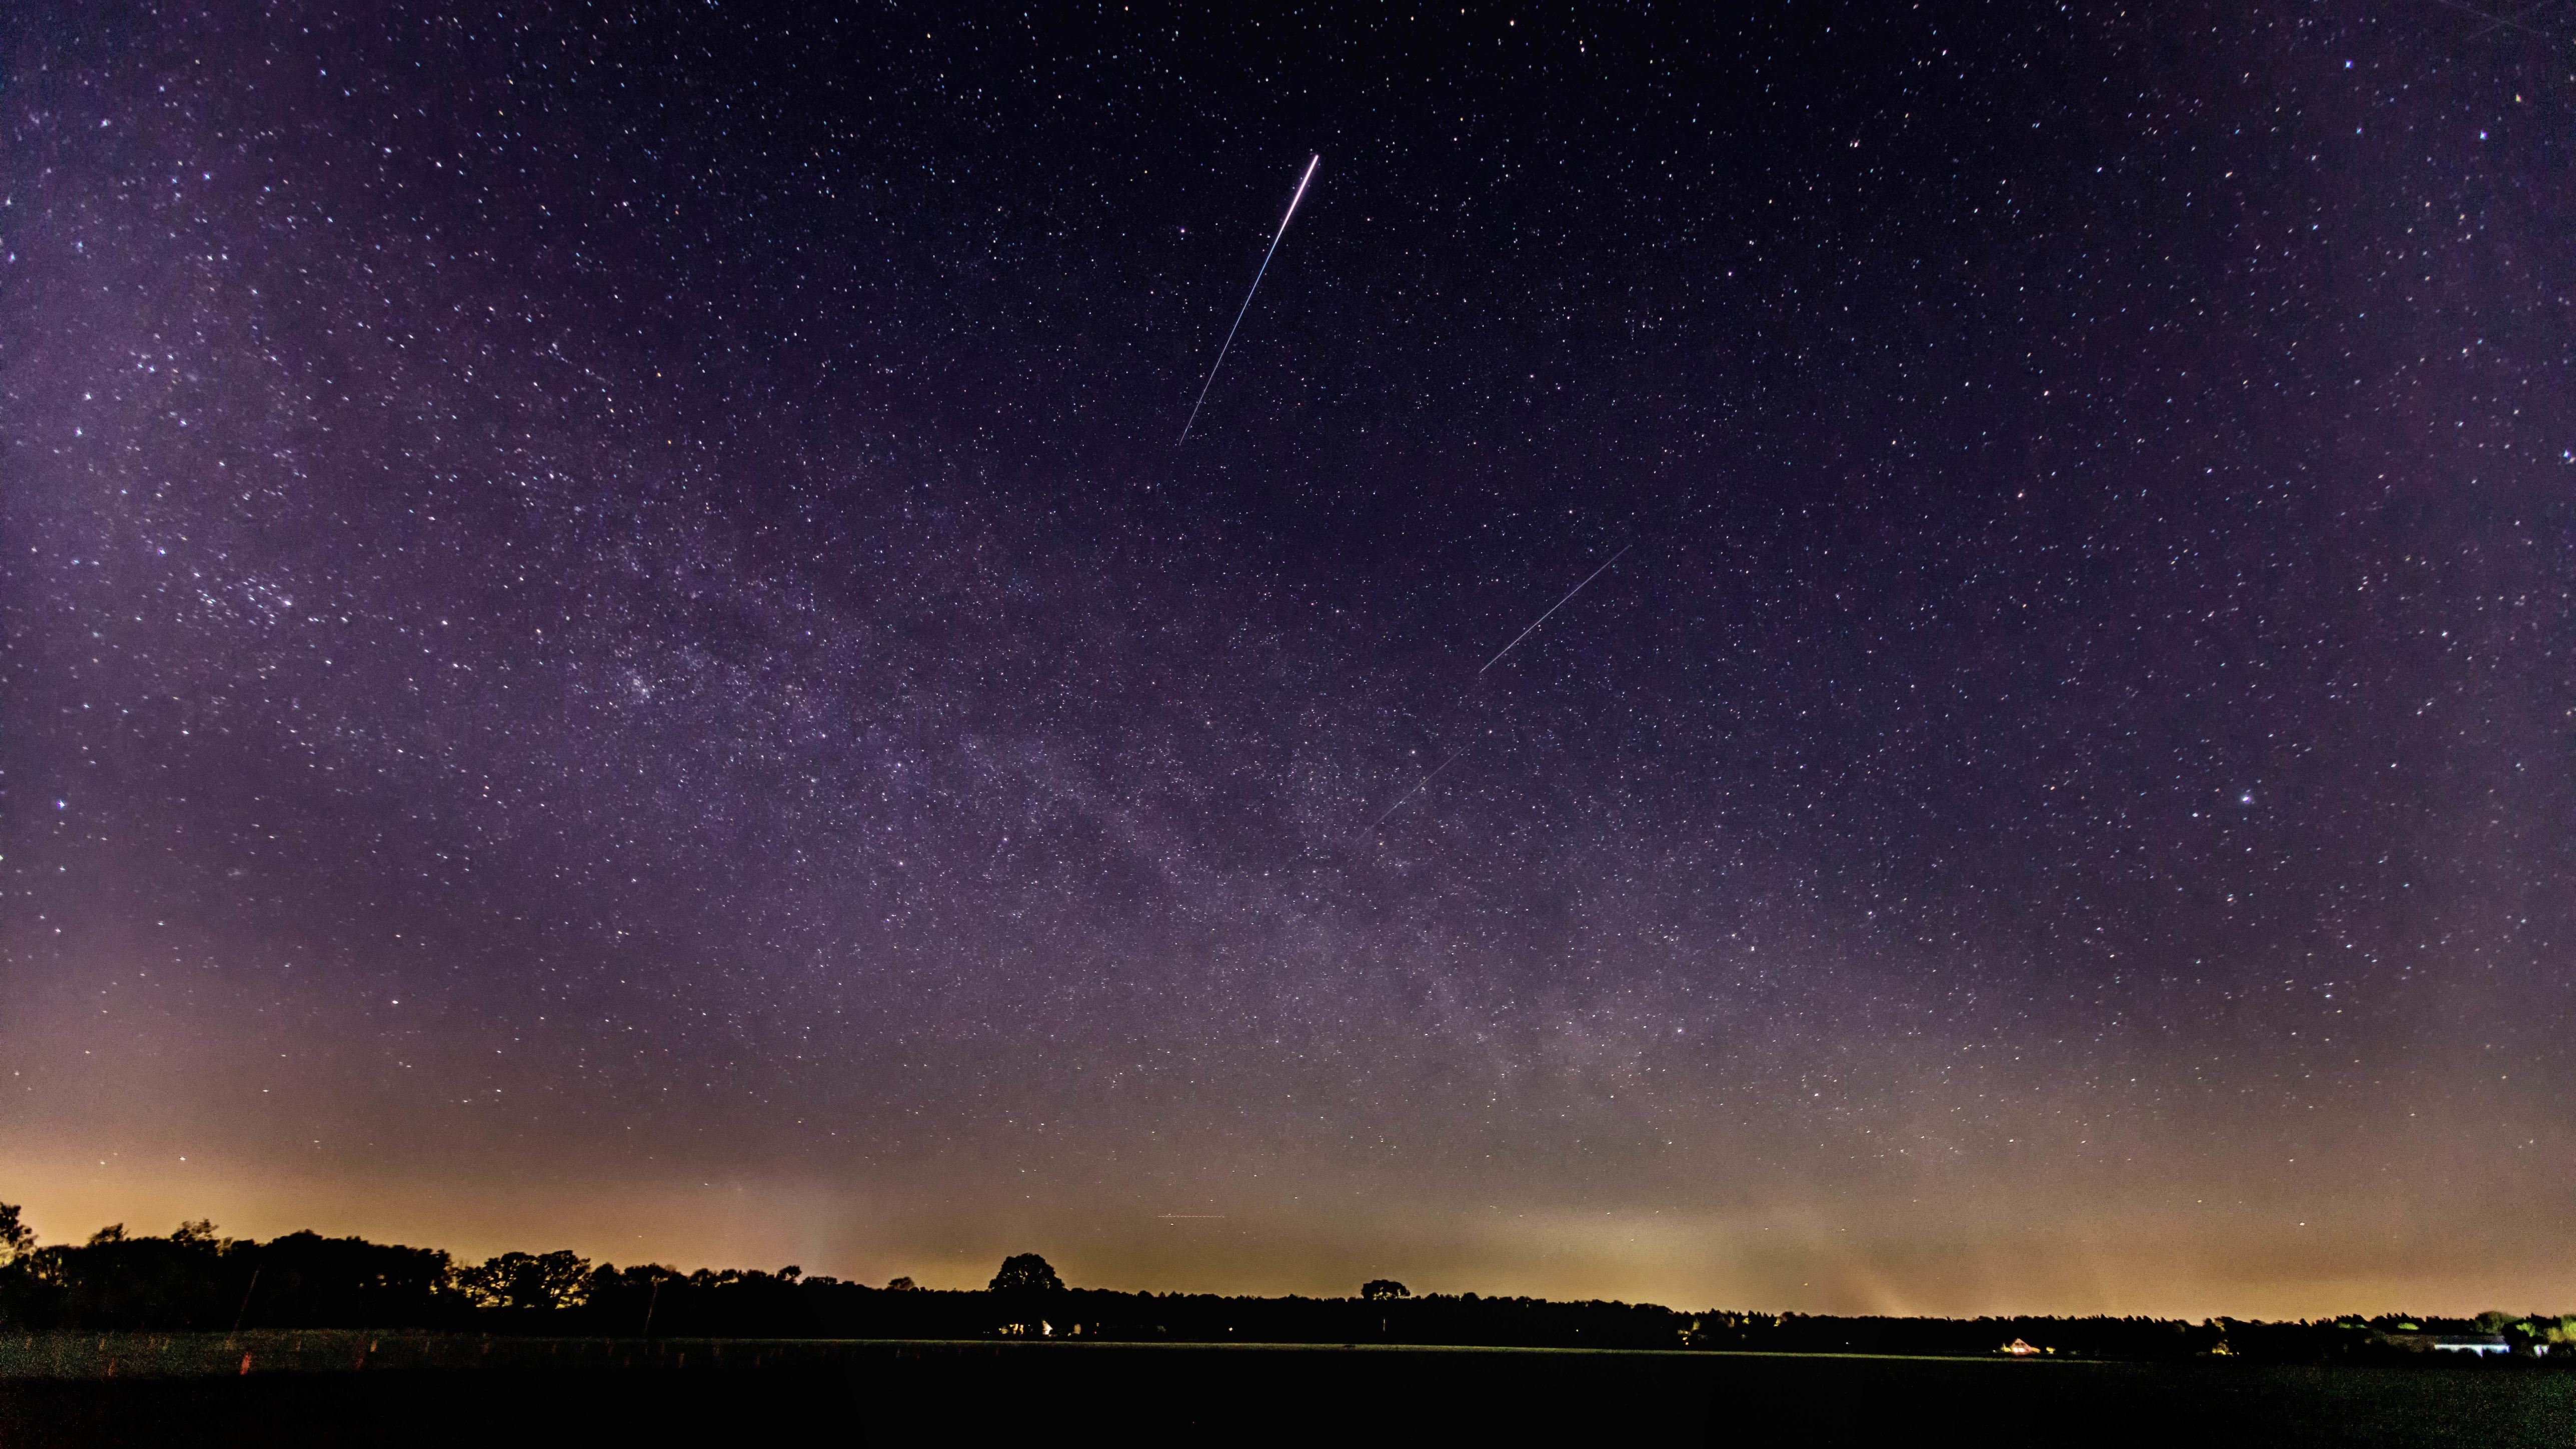 Lyrid meteor shower peaks April 22. Here’s how to watch the night sky